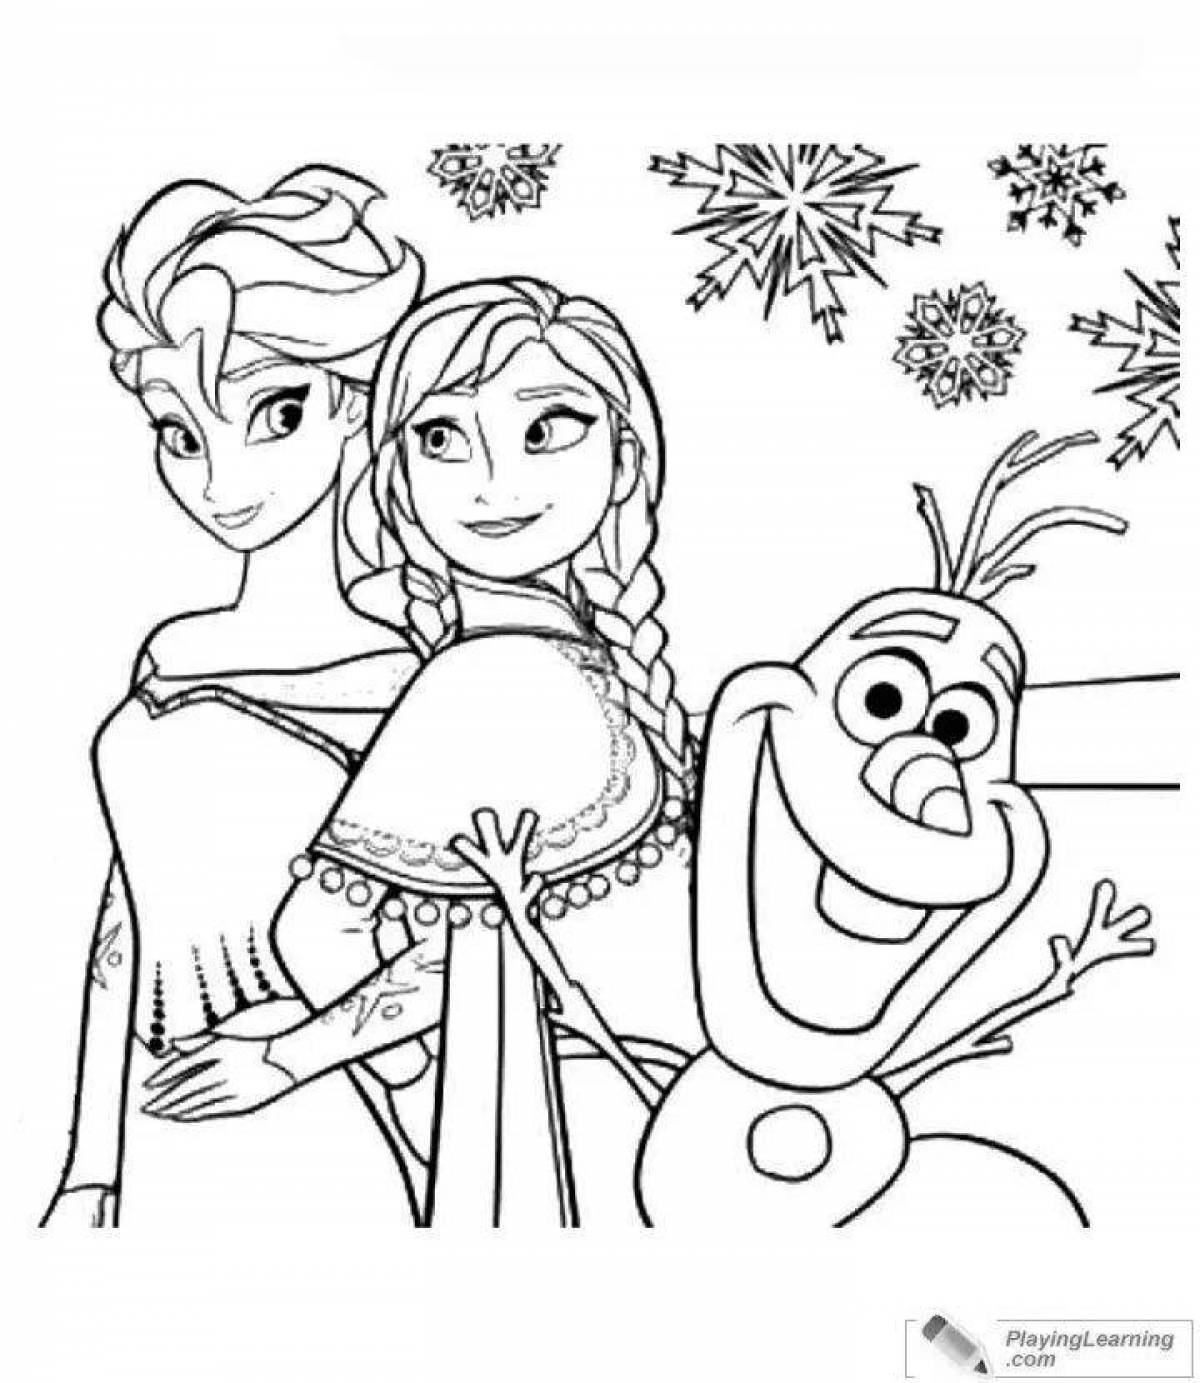 Sparkle coloring anna olaf and elsa